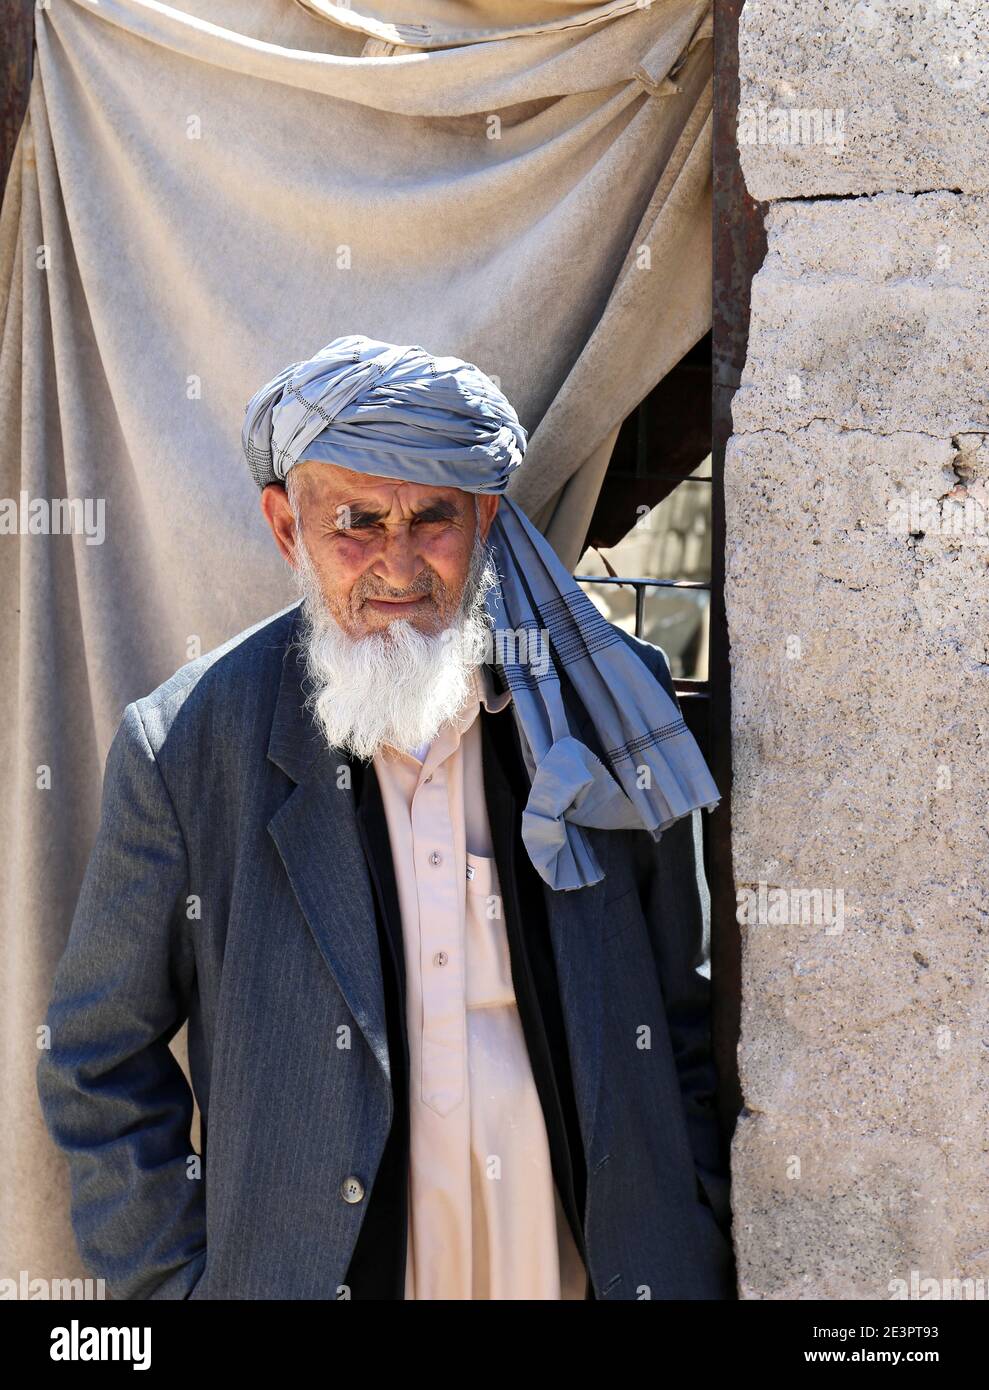 OVAKENT,HATAY,TURKEY-JUNE 3:Religious Afghan Man with long beard standing and posing in front of his house.June 3,2017 in Ovakent,Hatay,Turkey. Stock Photo